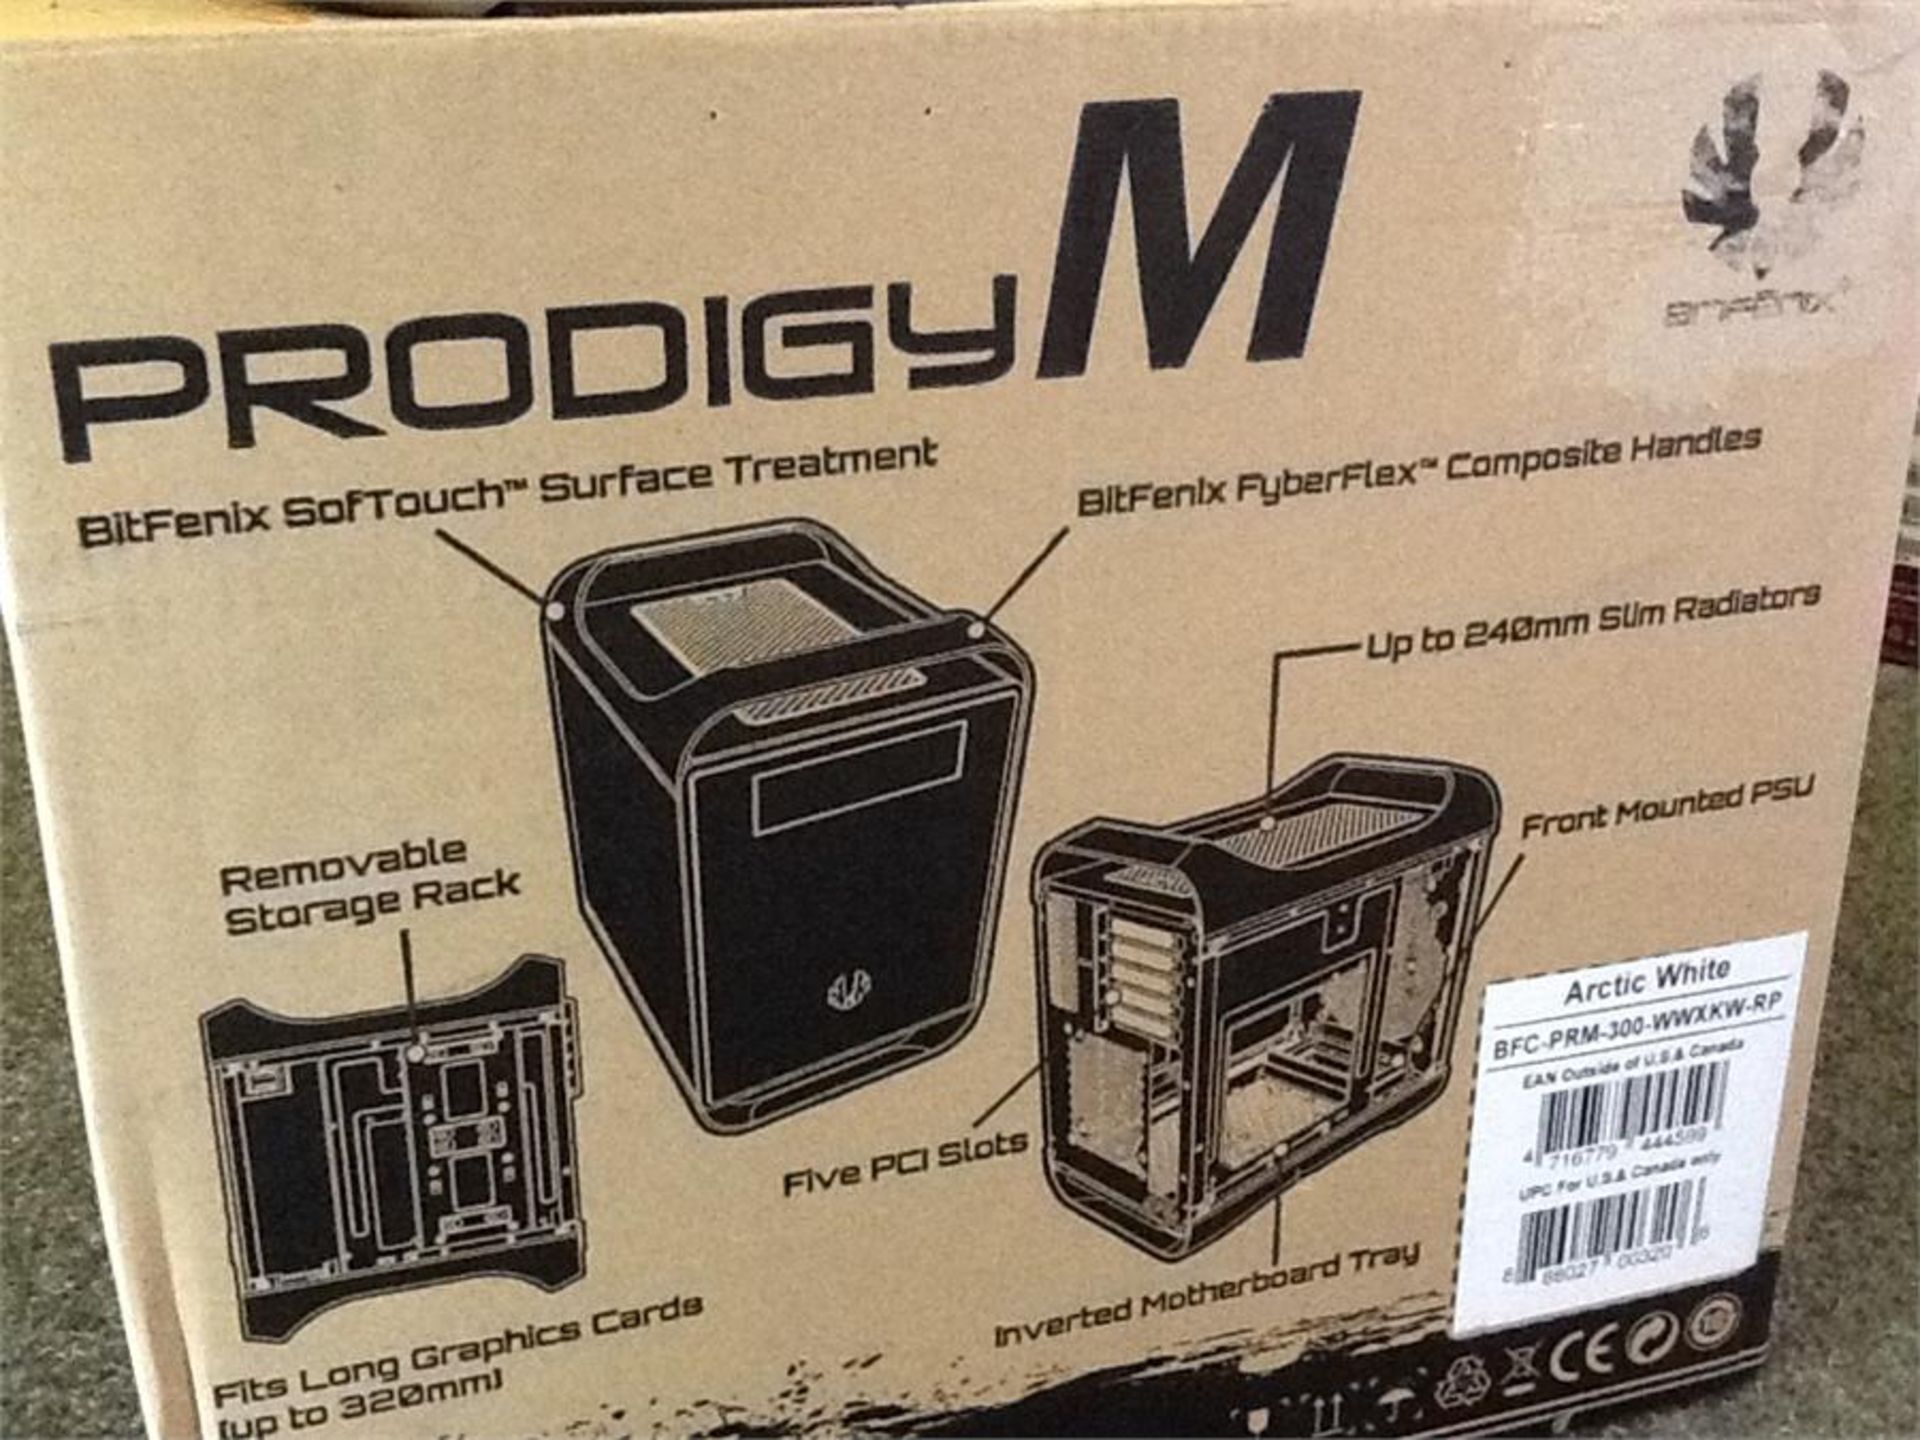 Prodigy M computer case, boxed - Image 2 of 10